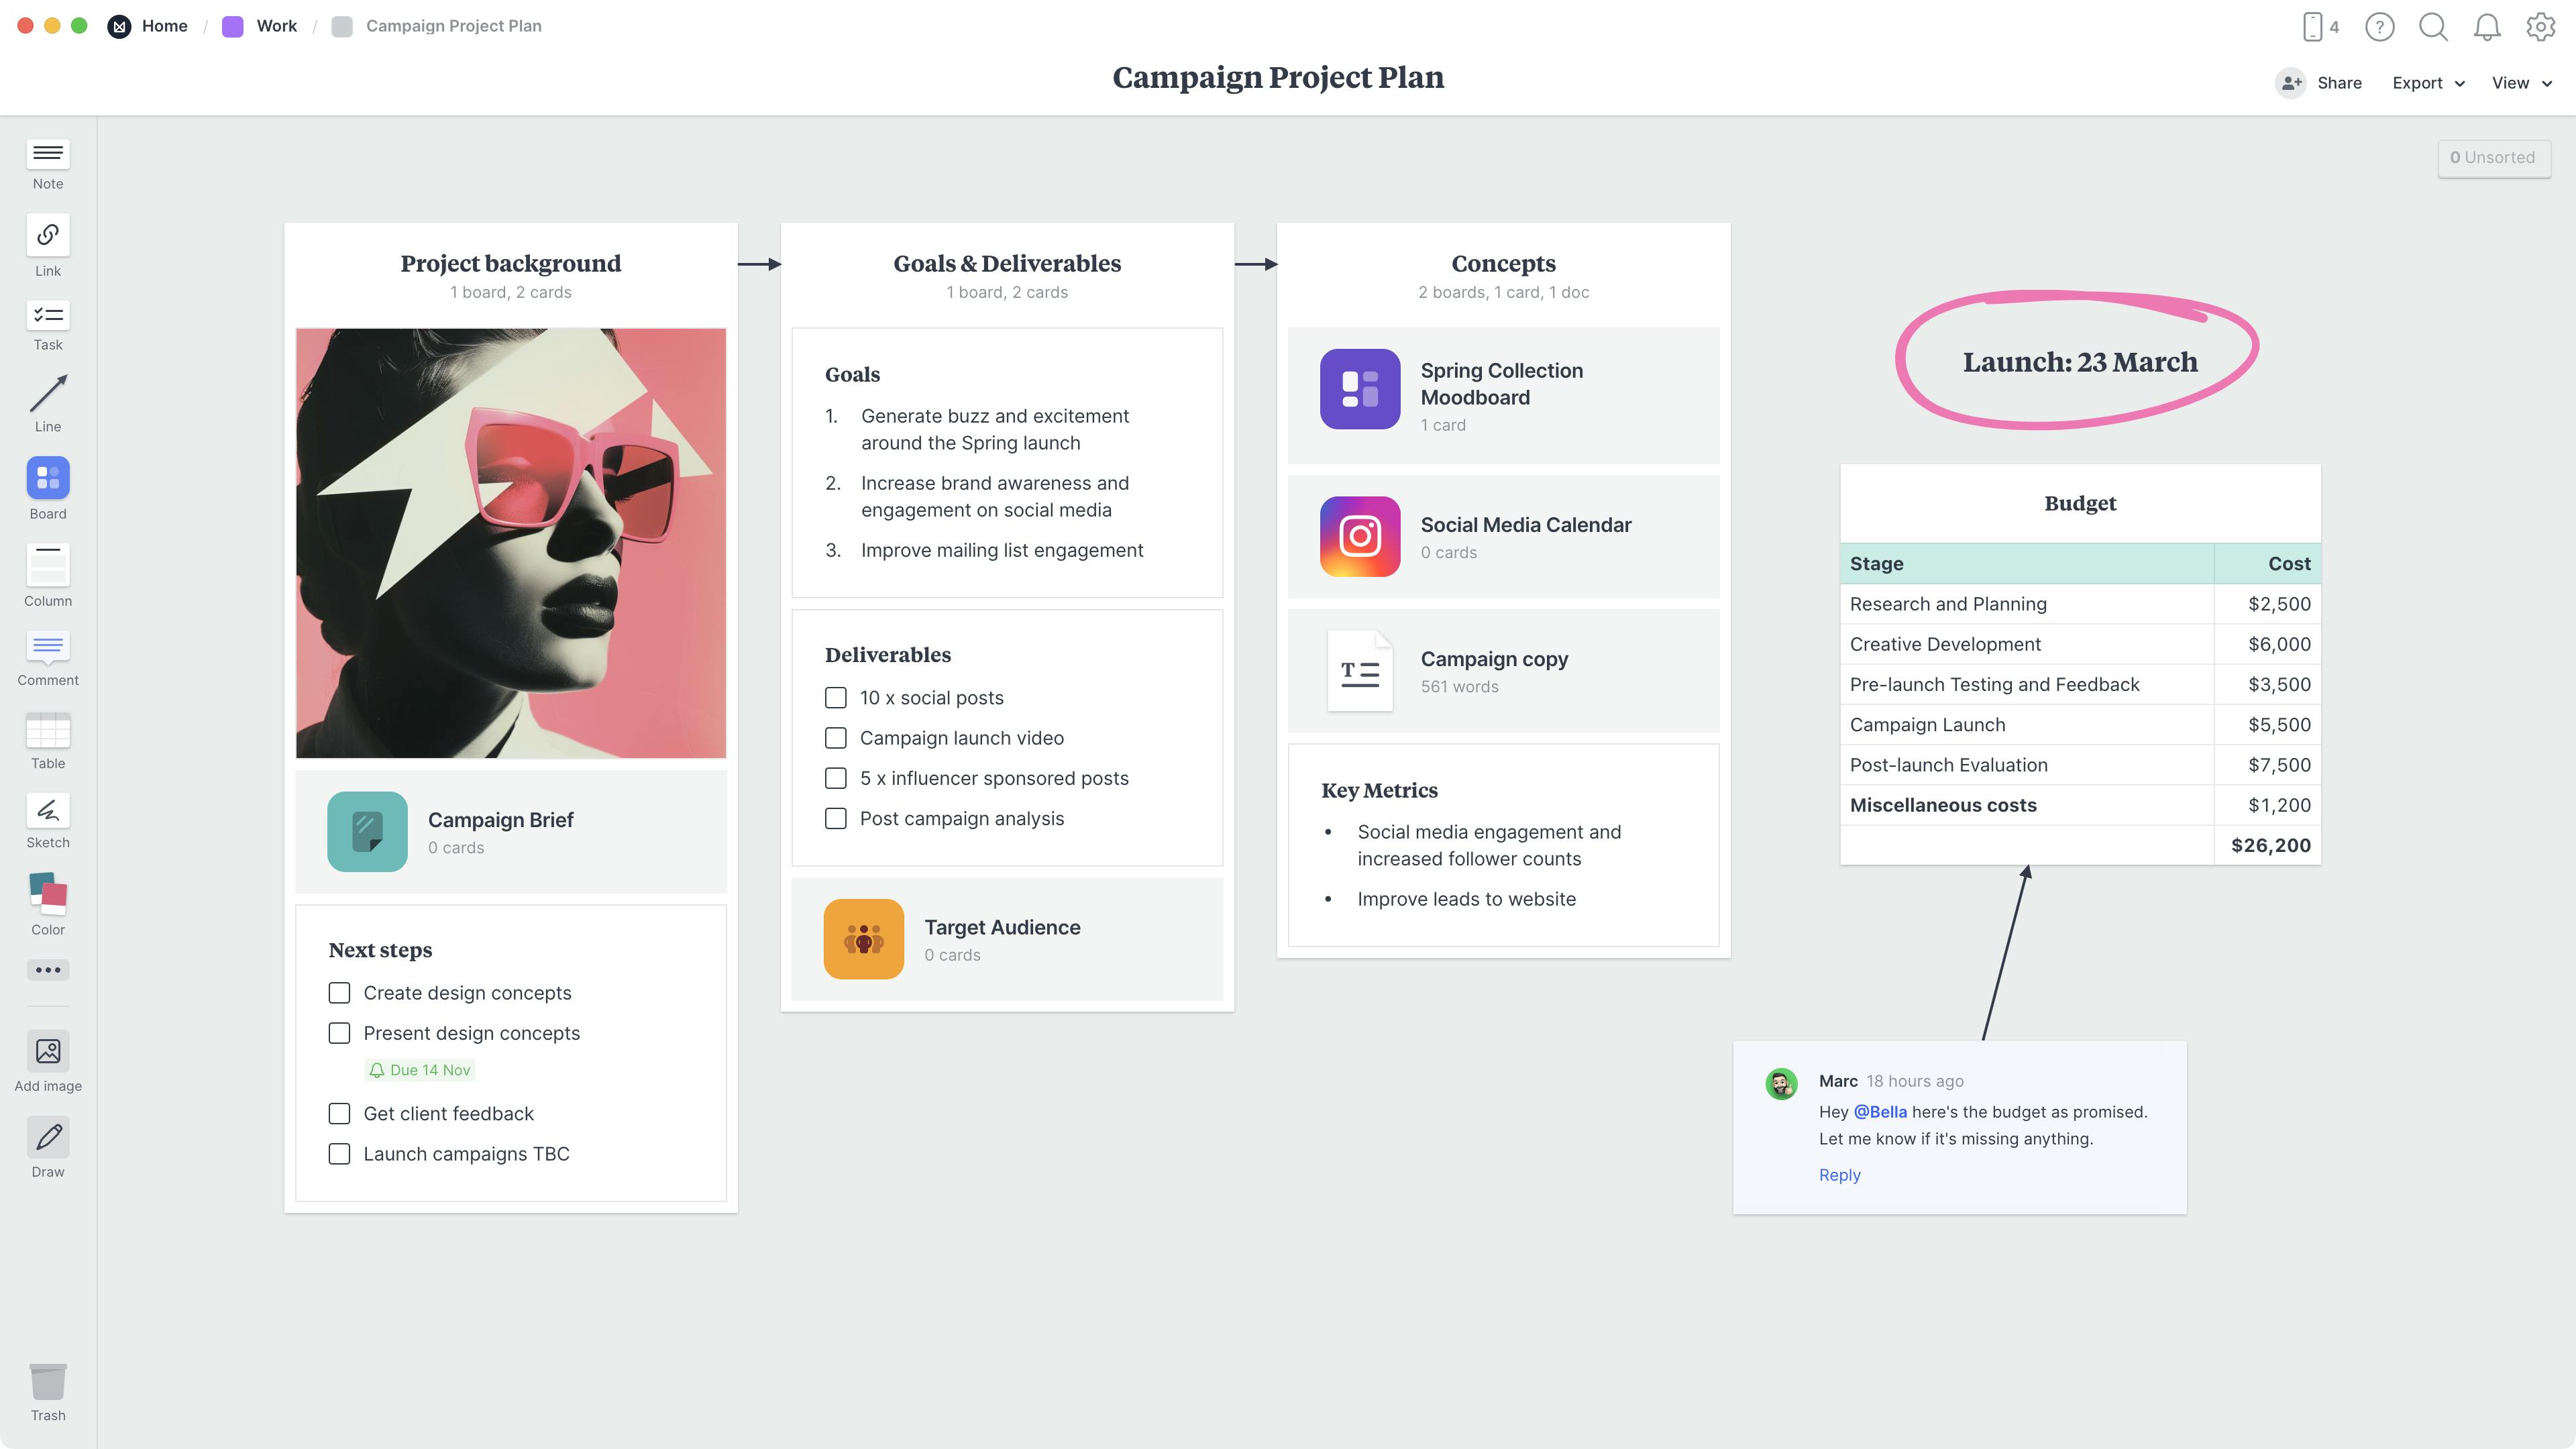 Campaign Project Plan Template, within the Milanote app